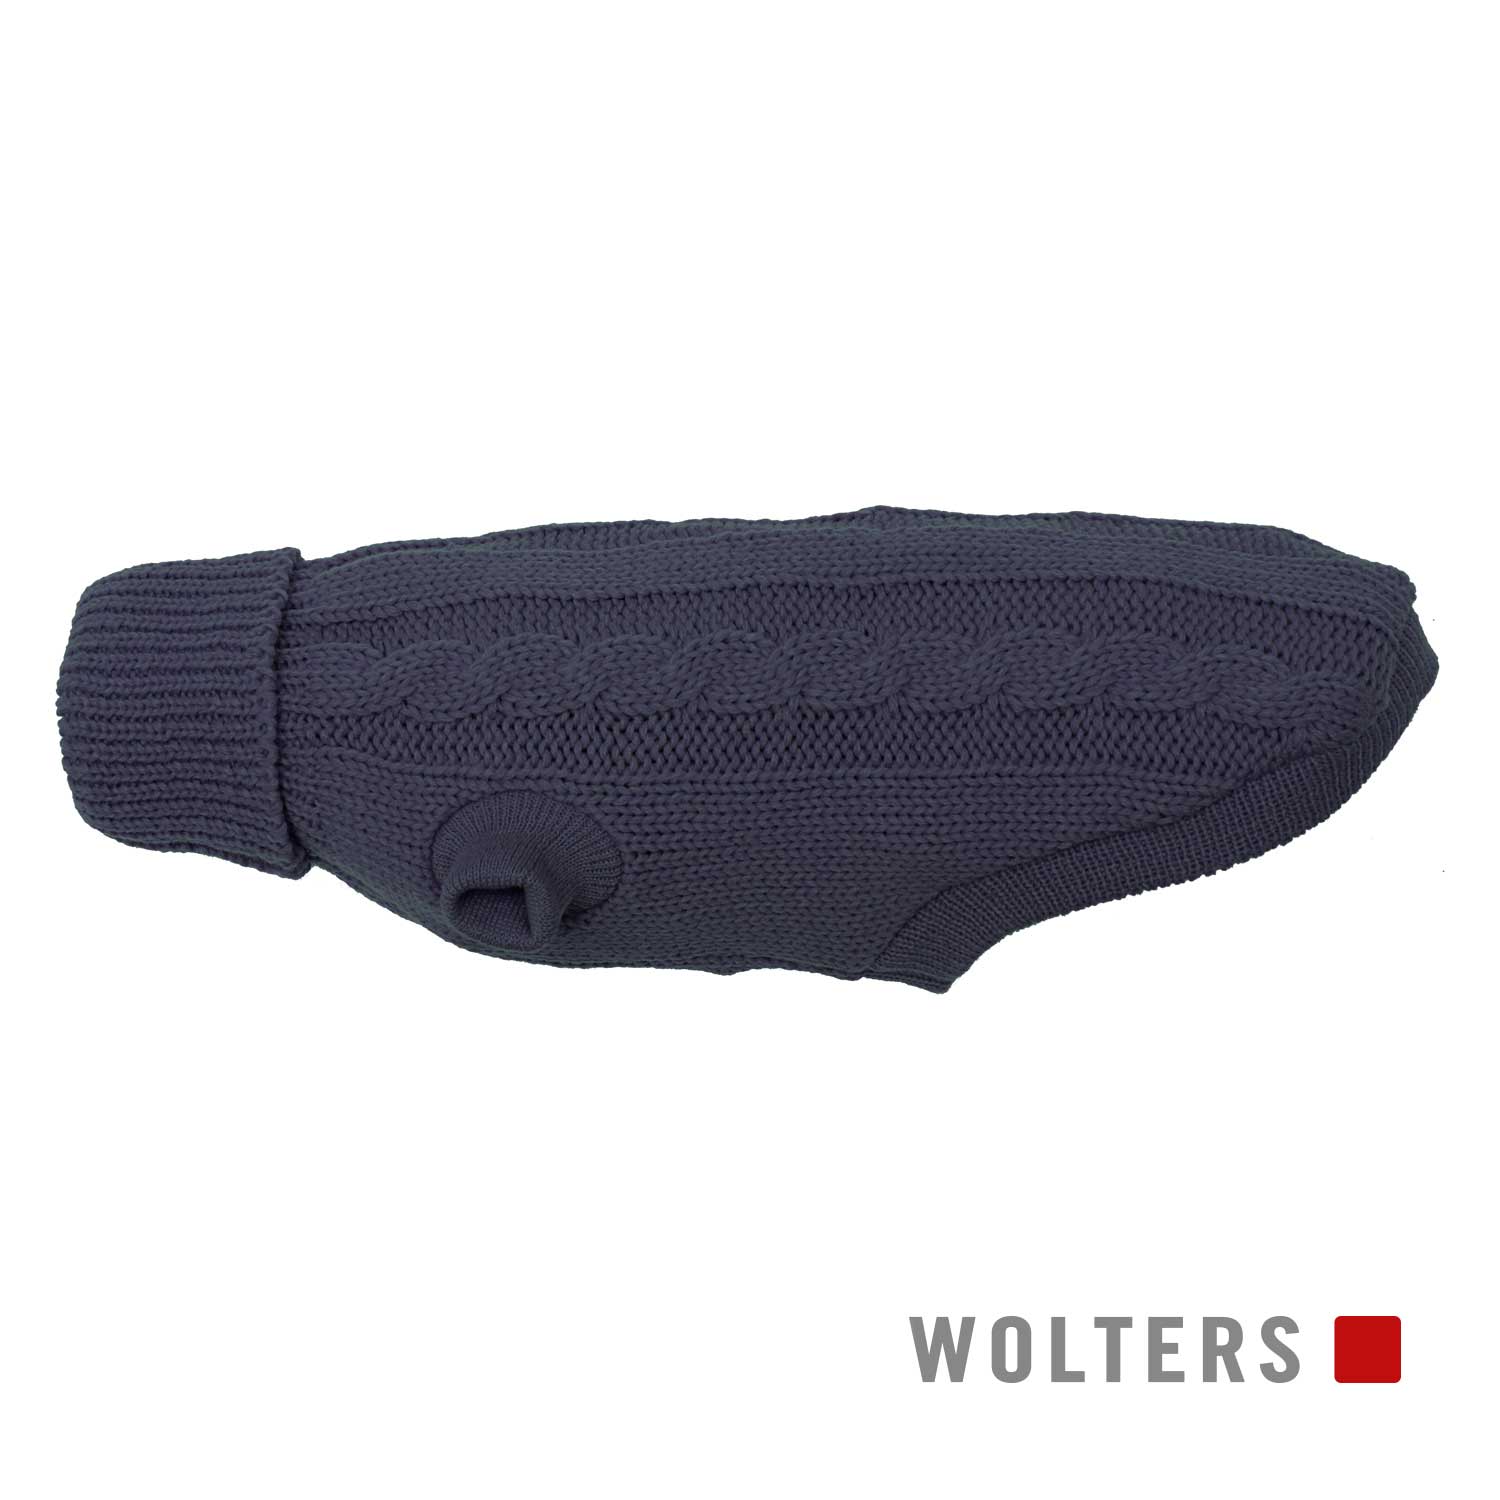 Wolters Zopf-Strickpullover - brombeer